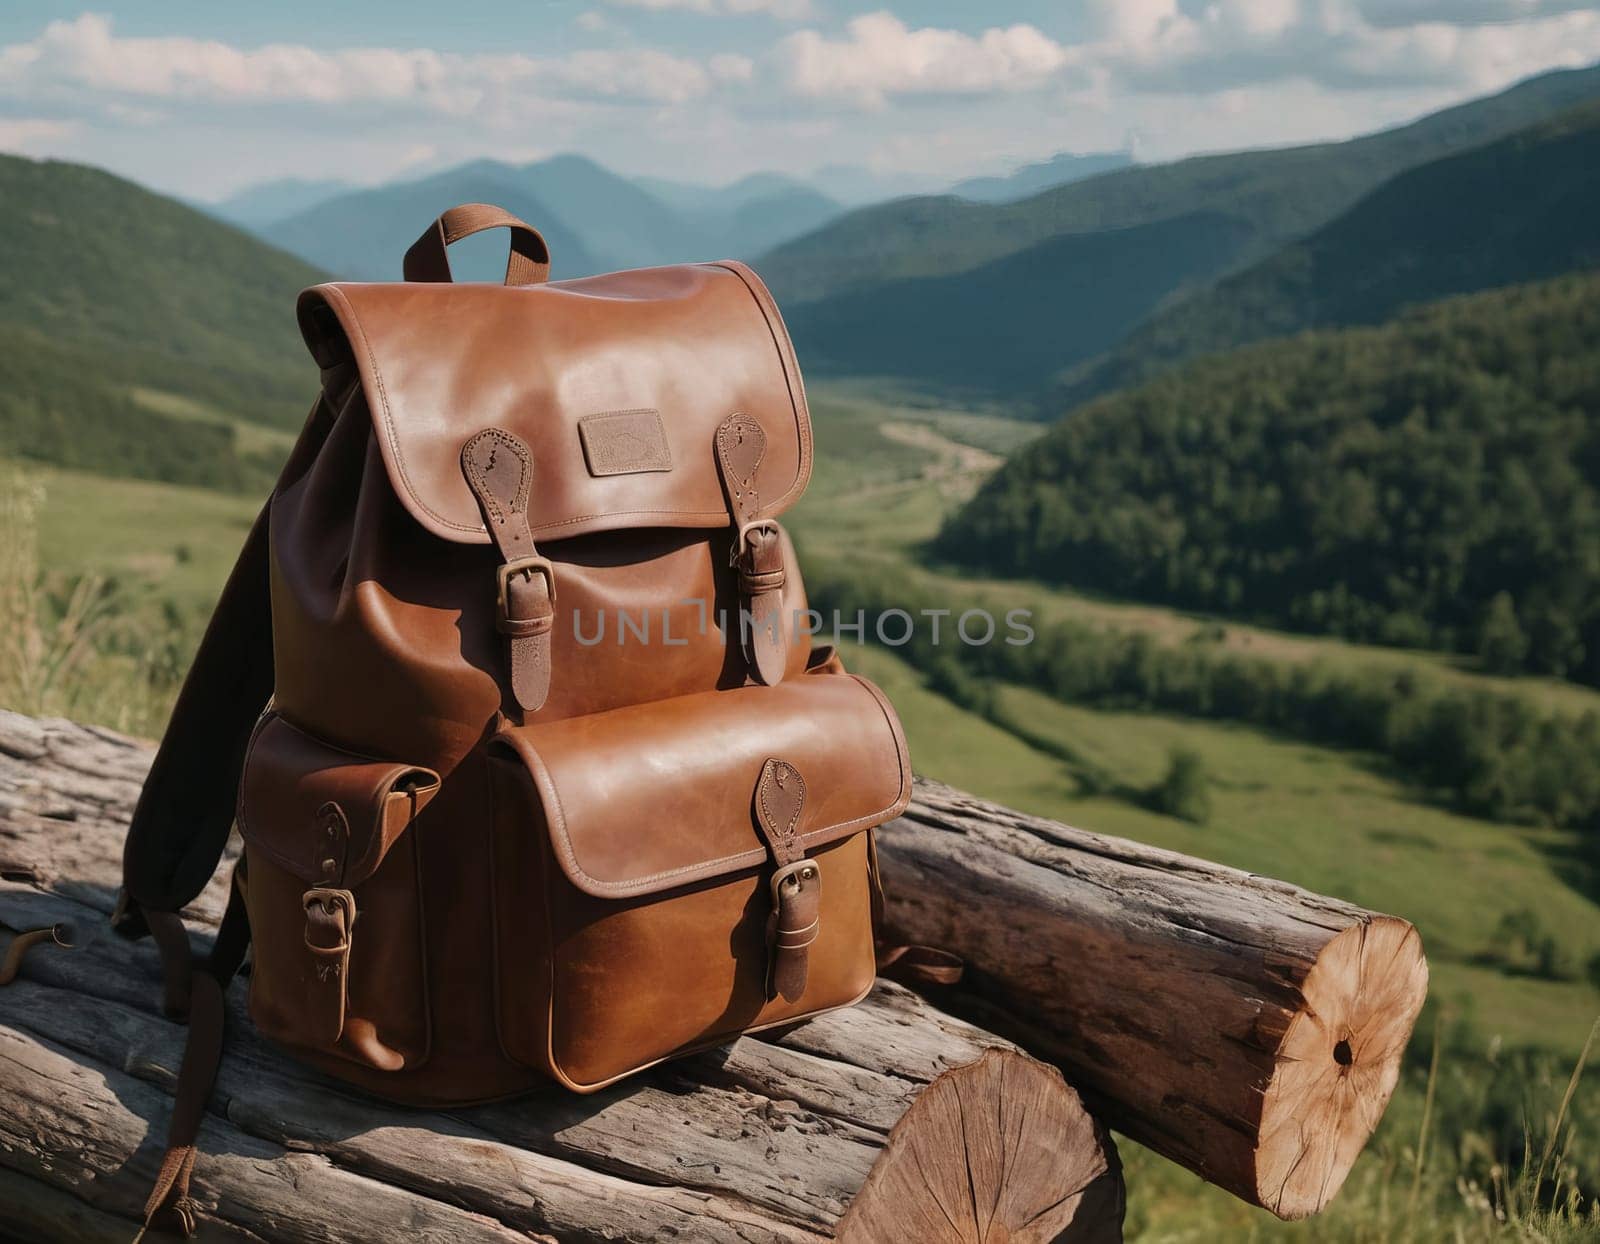 Leather backpack on a log with a scenic mountain landscape in the background, under a clear sky